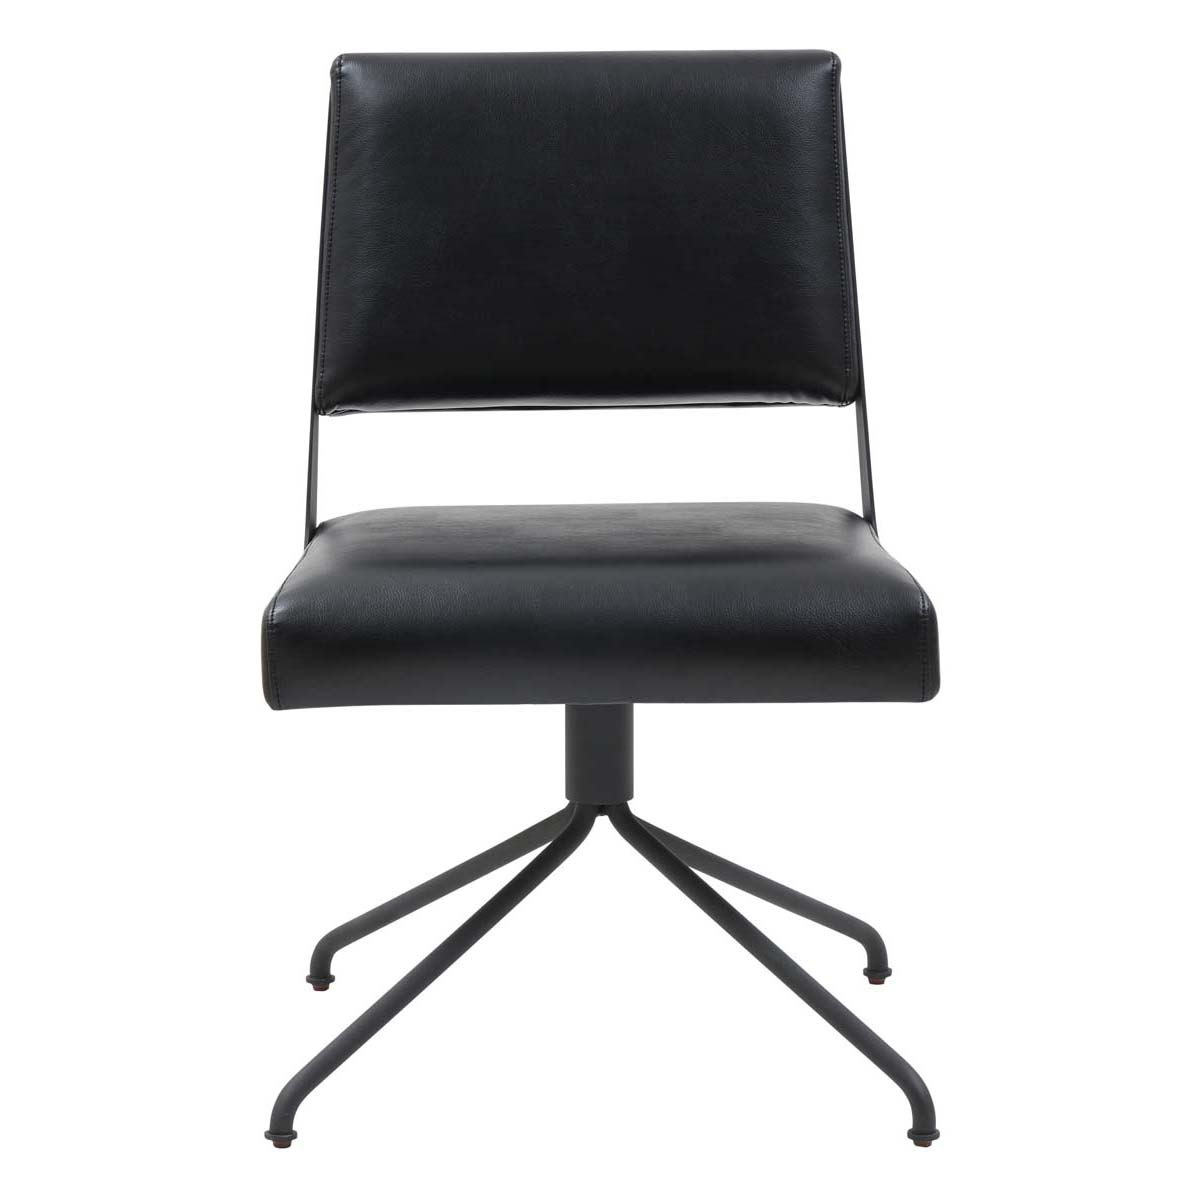 Safavieh Couture Emmeline Swivel Office Chair